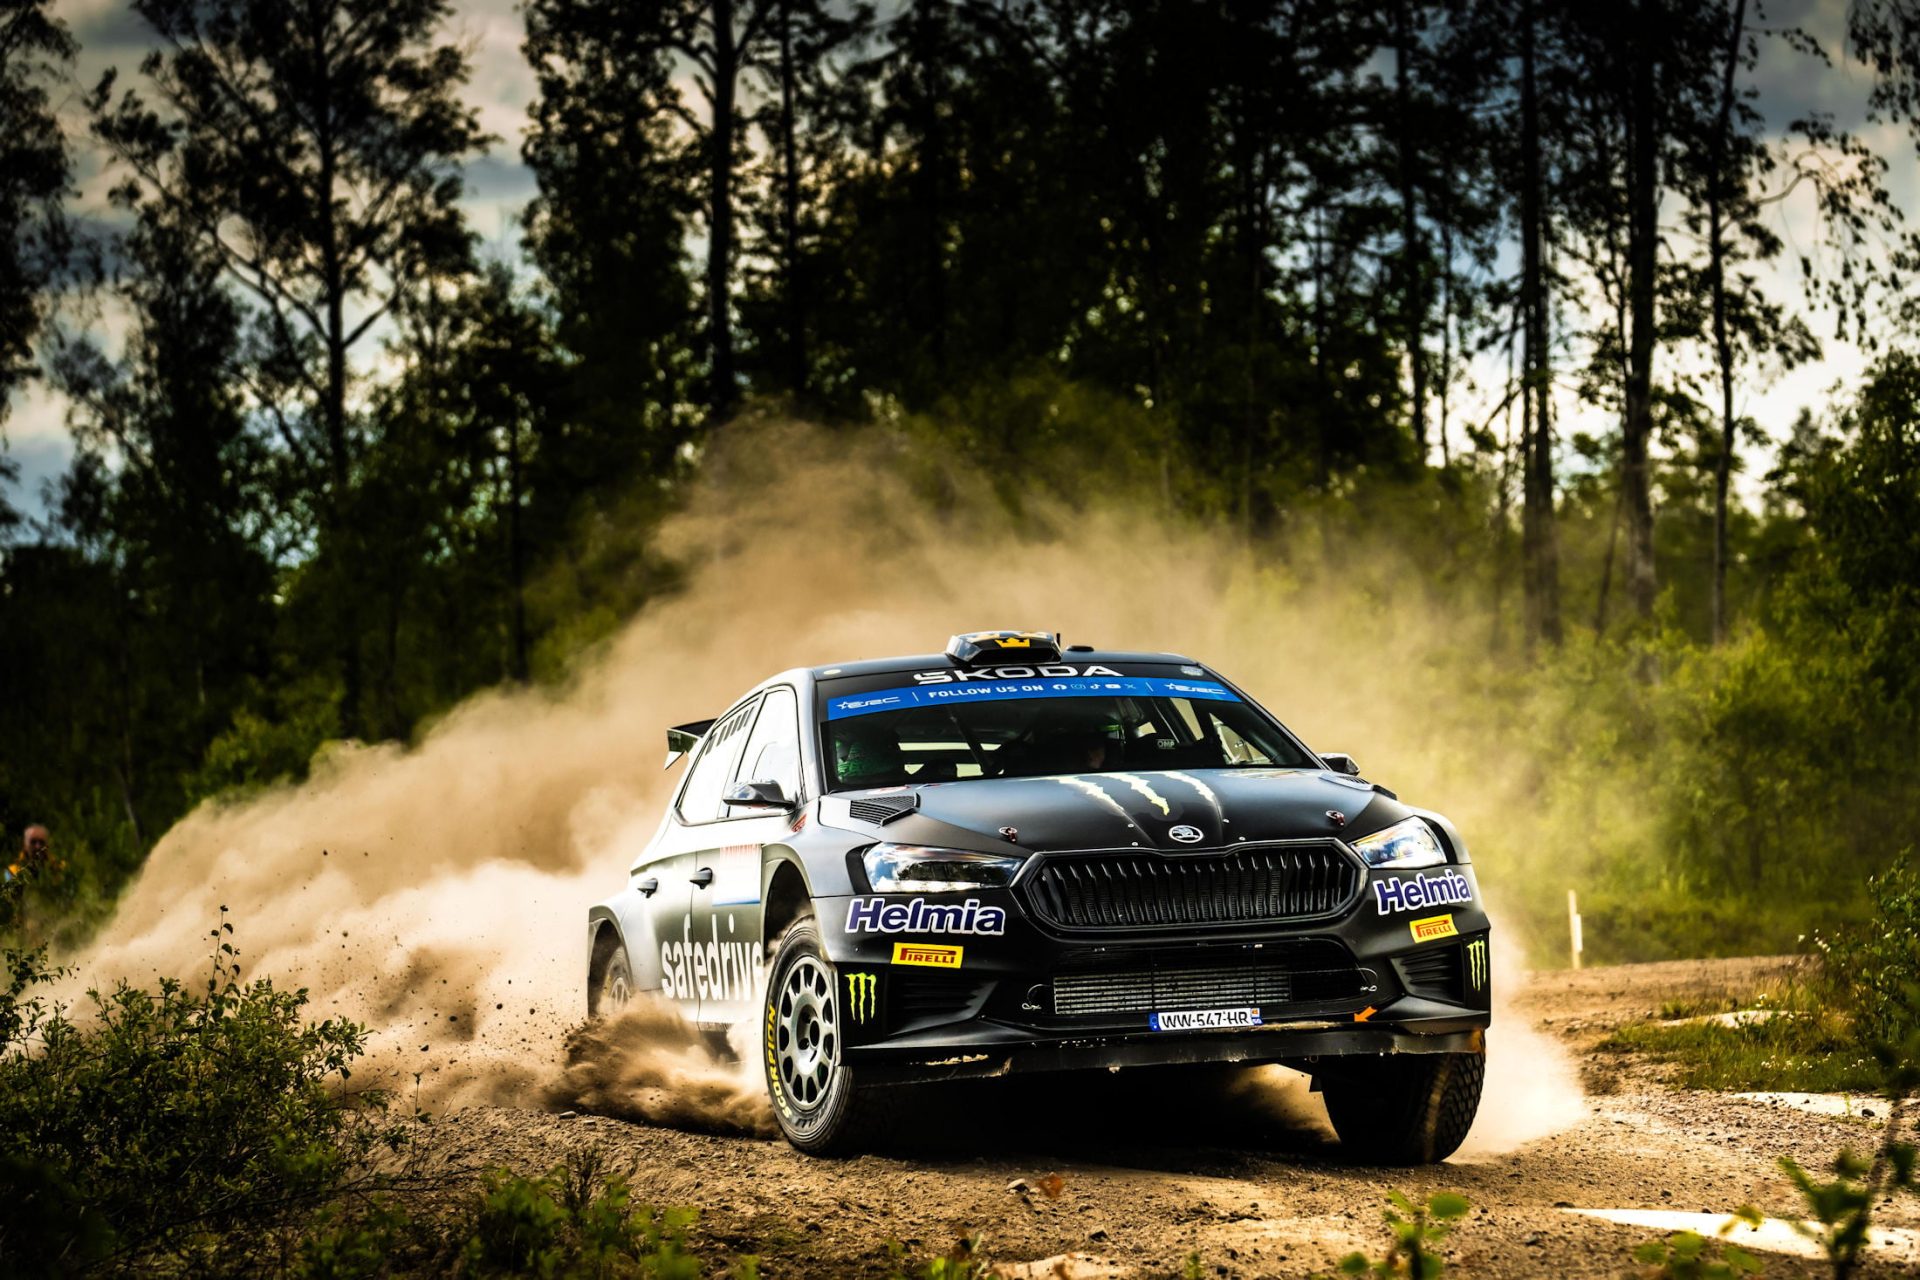 Dynamic Solberg Dominates in Sweden with Stellar Performance